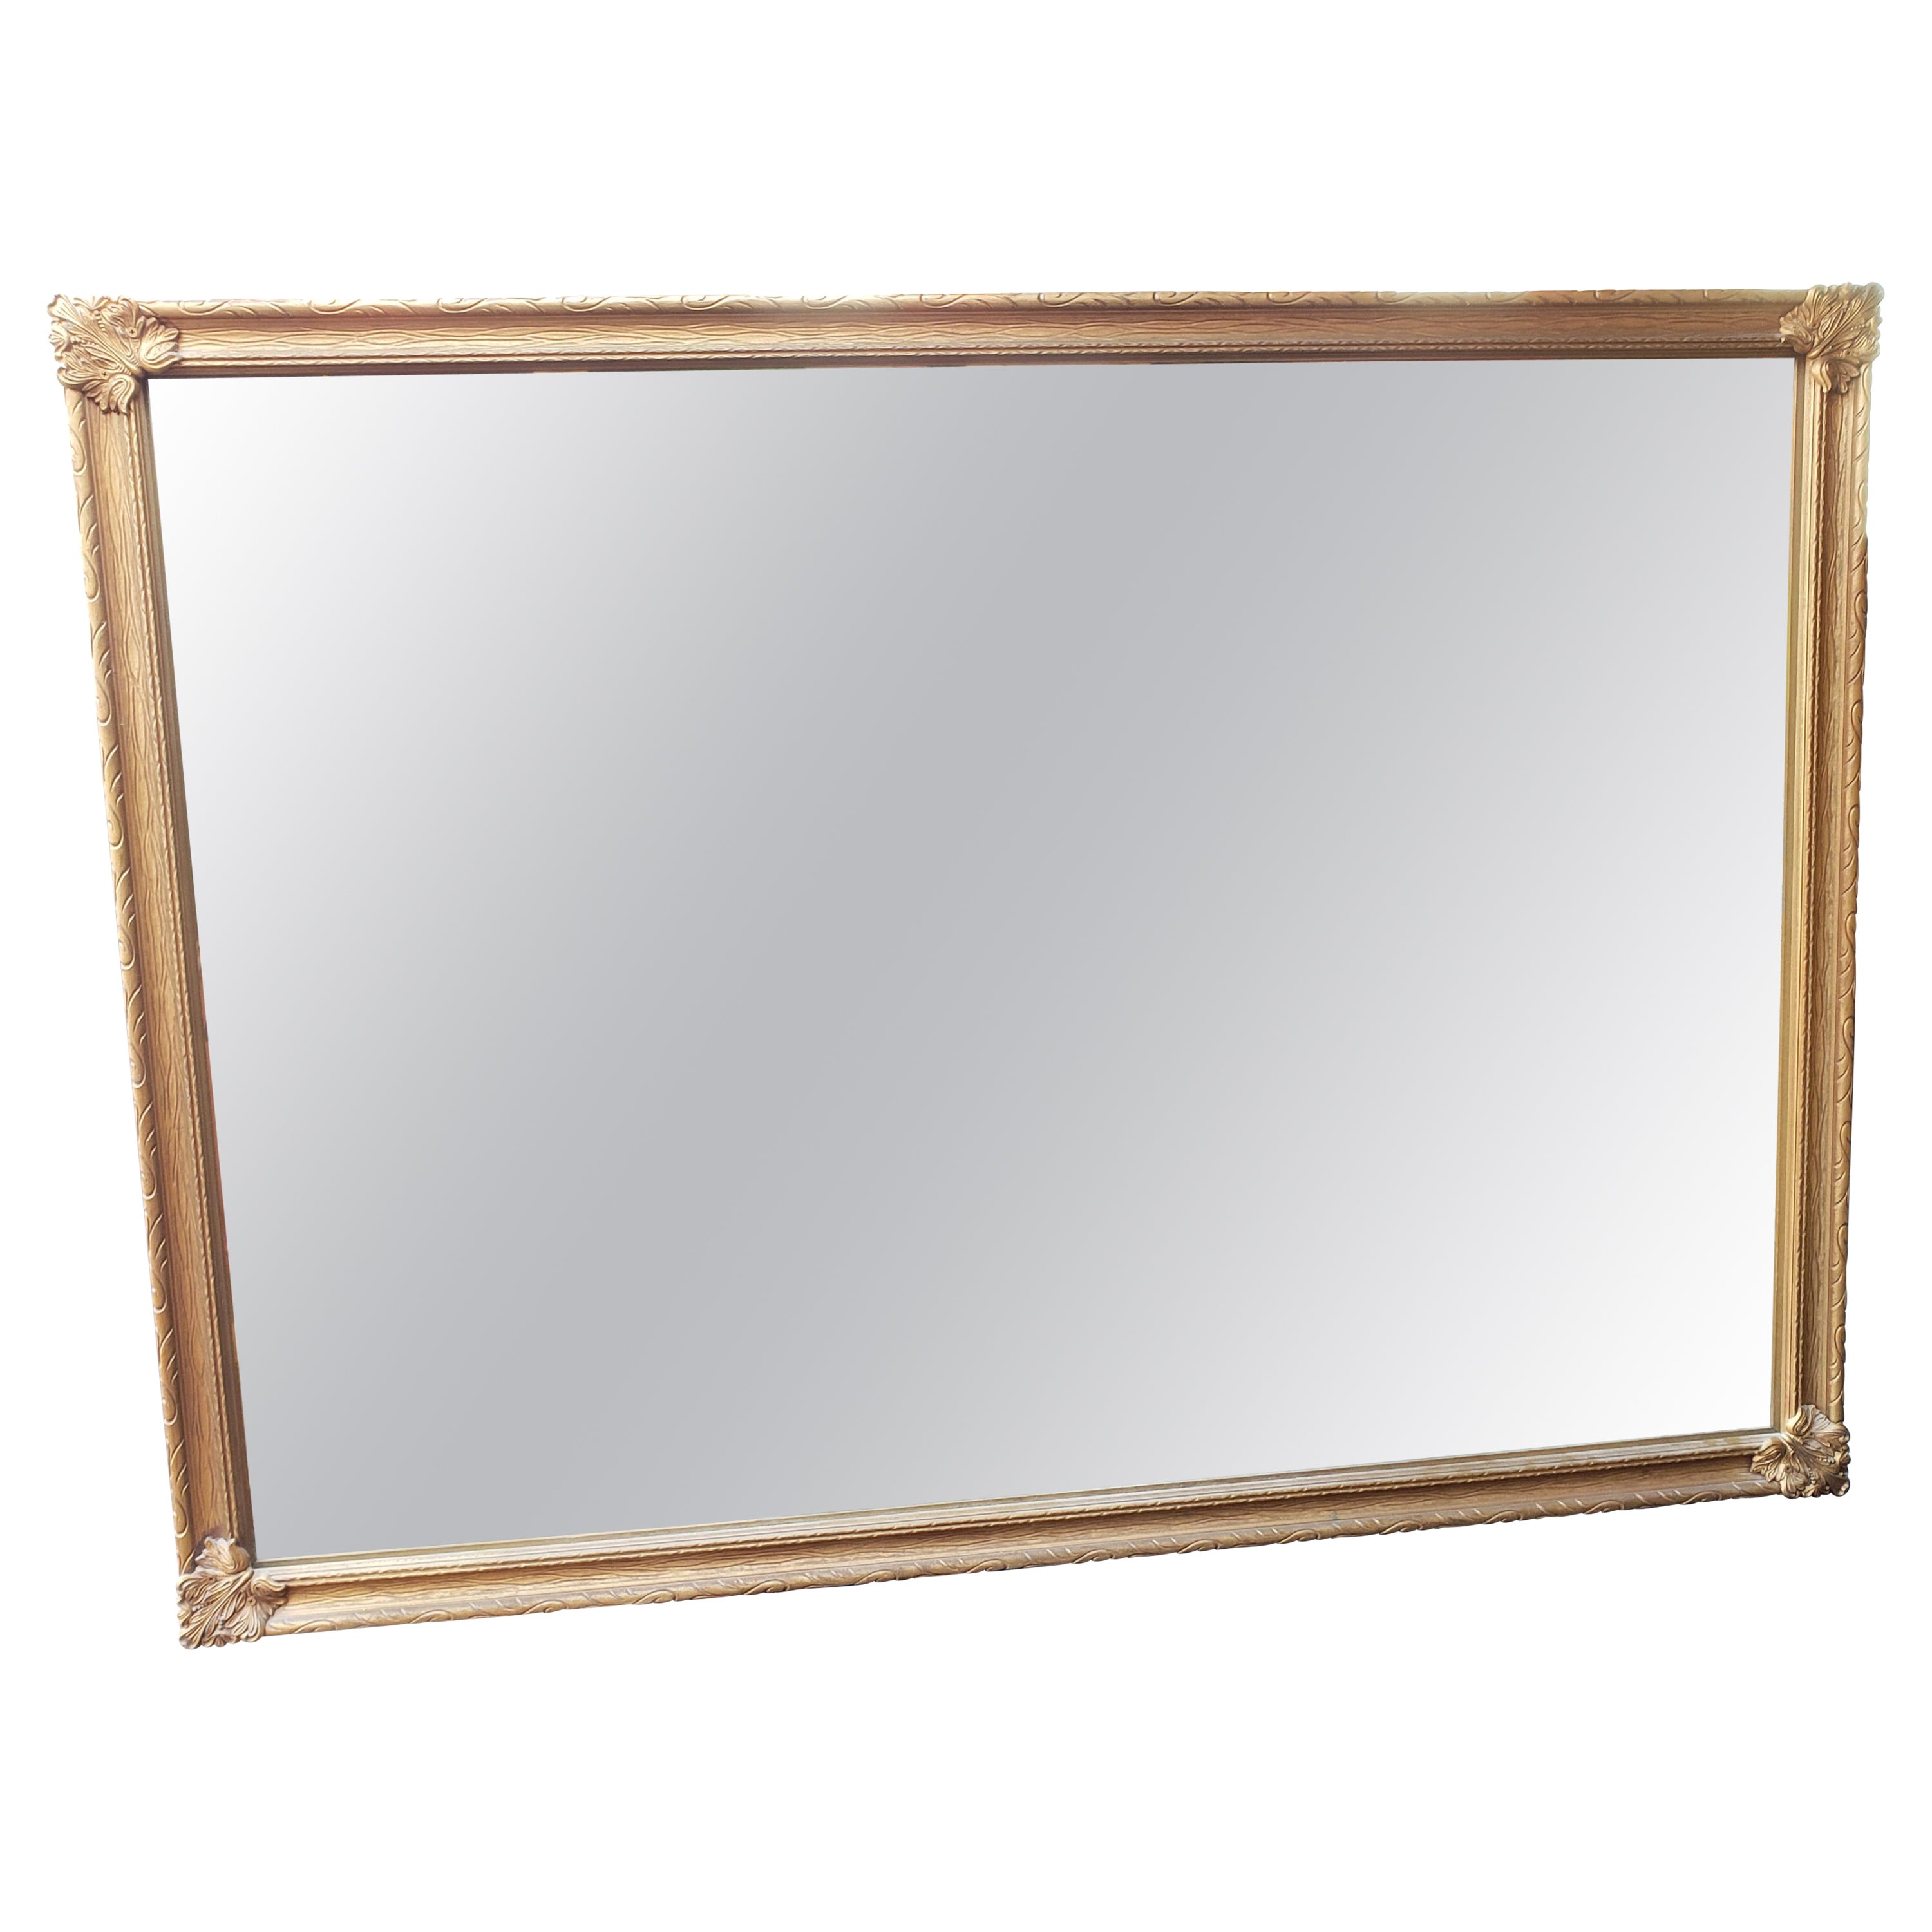 1970s Vintage Classical Giltwood and Brass Frame Mirror